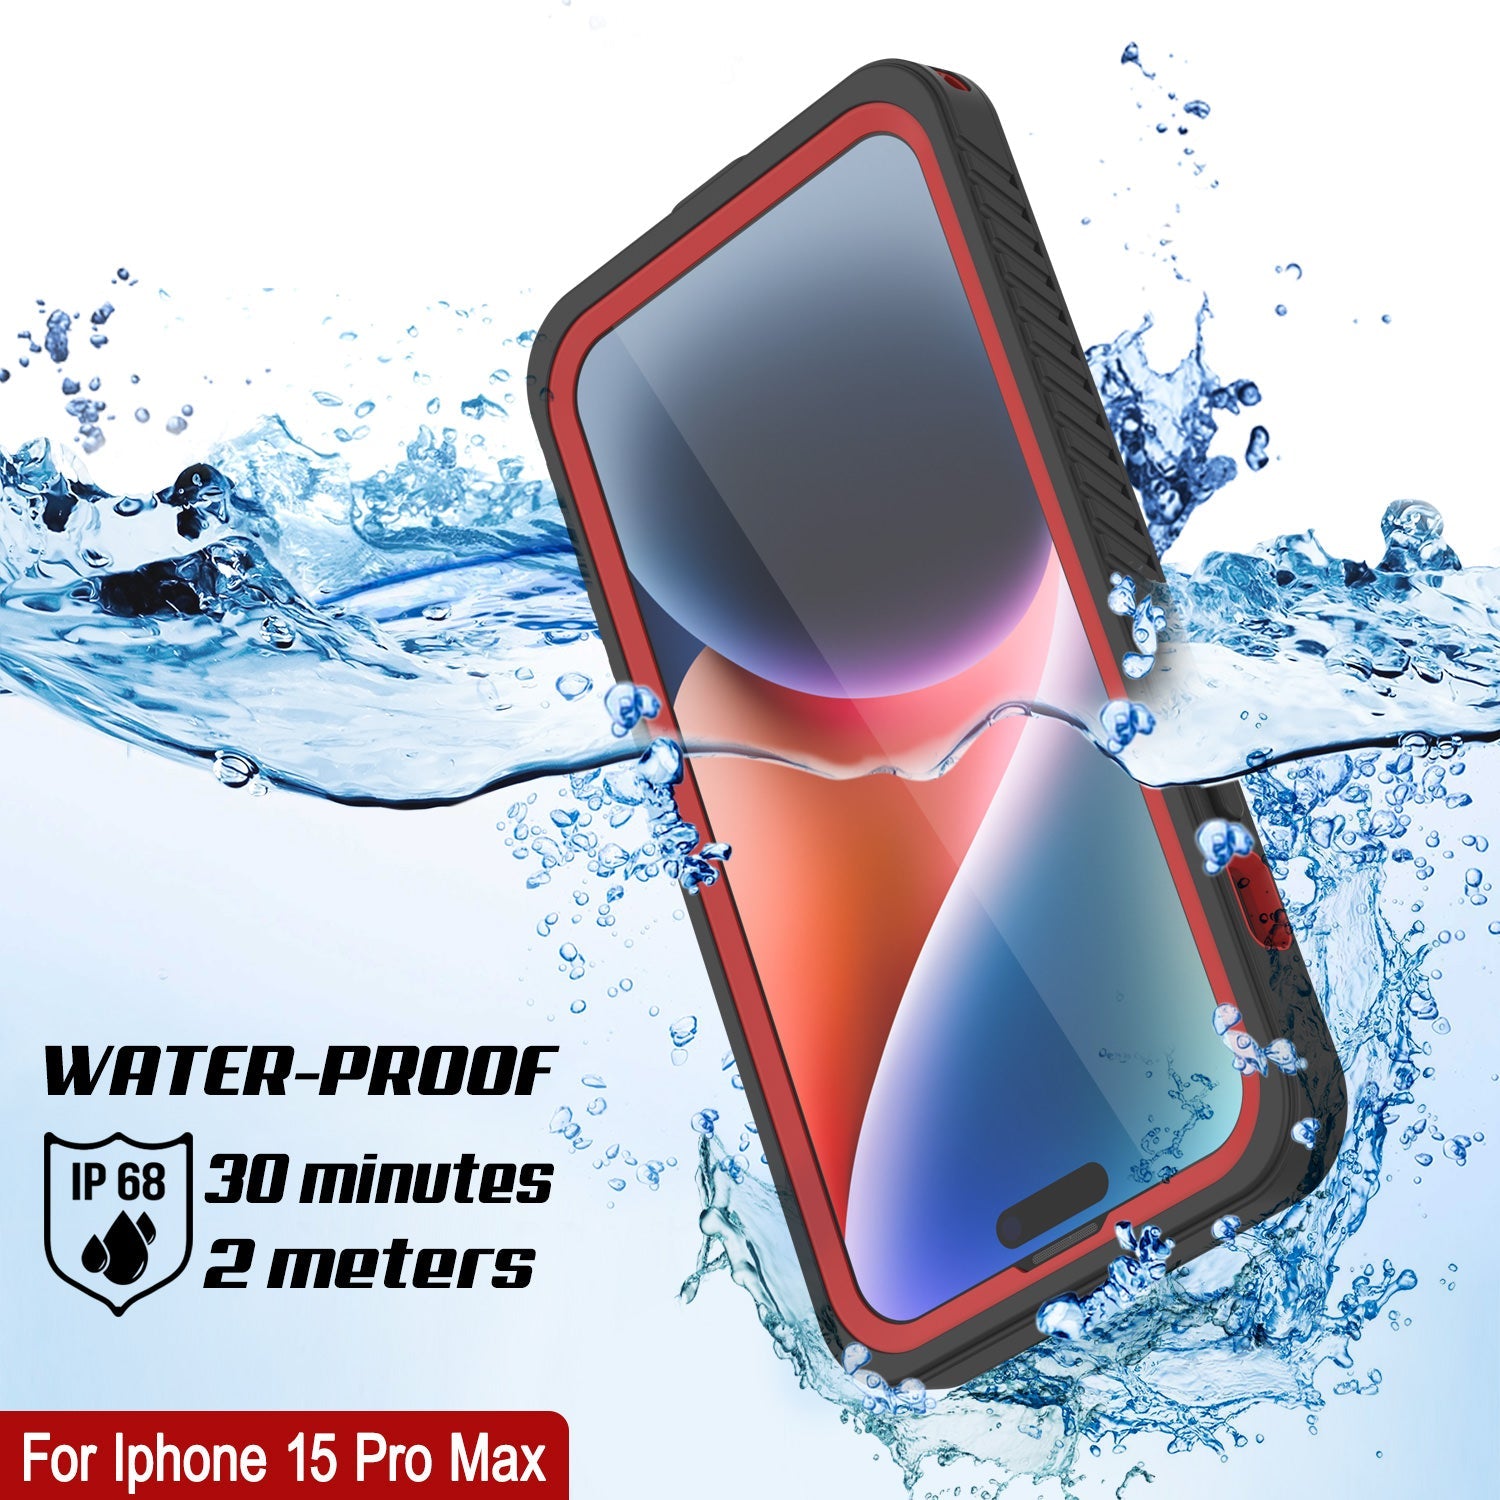 iPhone 15 Pro Max Waterproof Case, Punkcase [Extreme Series] Armor Cover W/ Built In Screen Protector [Red]